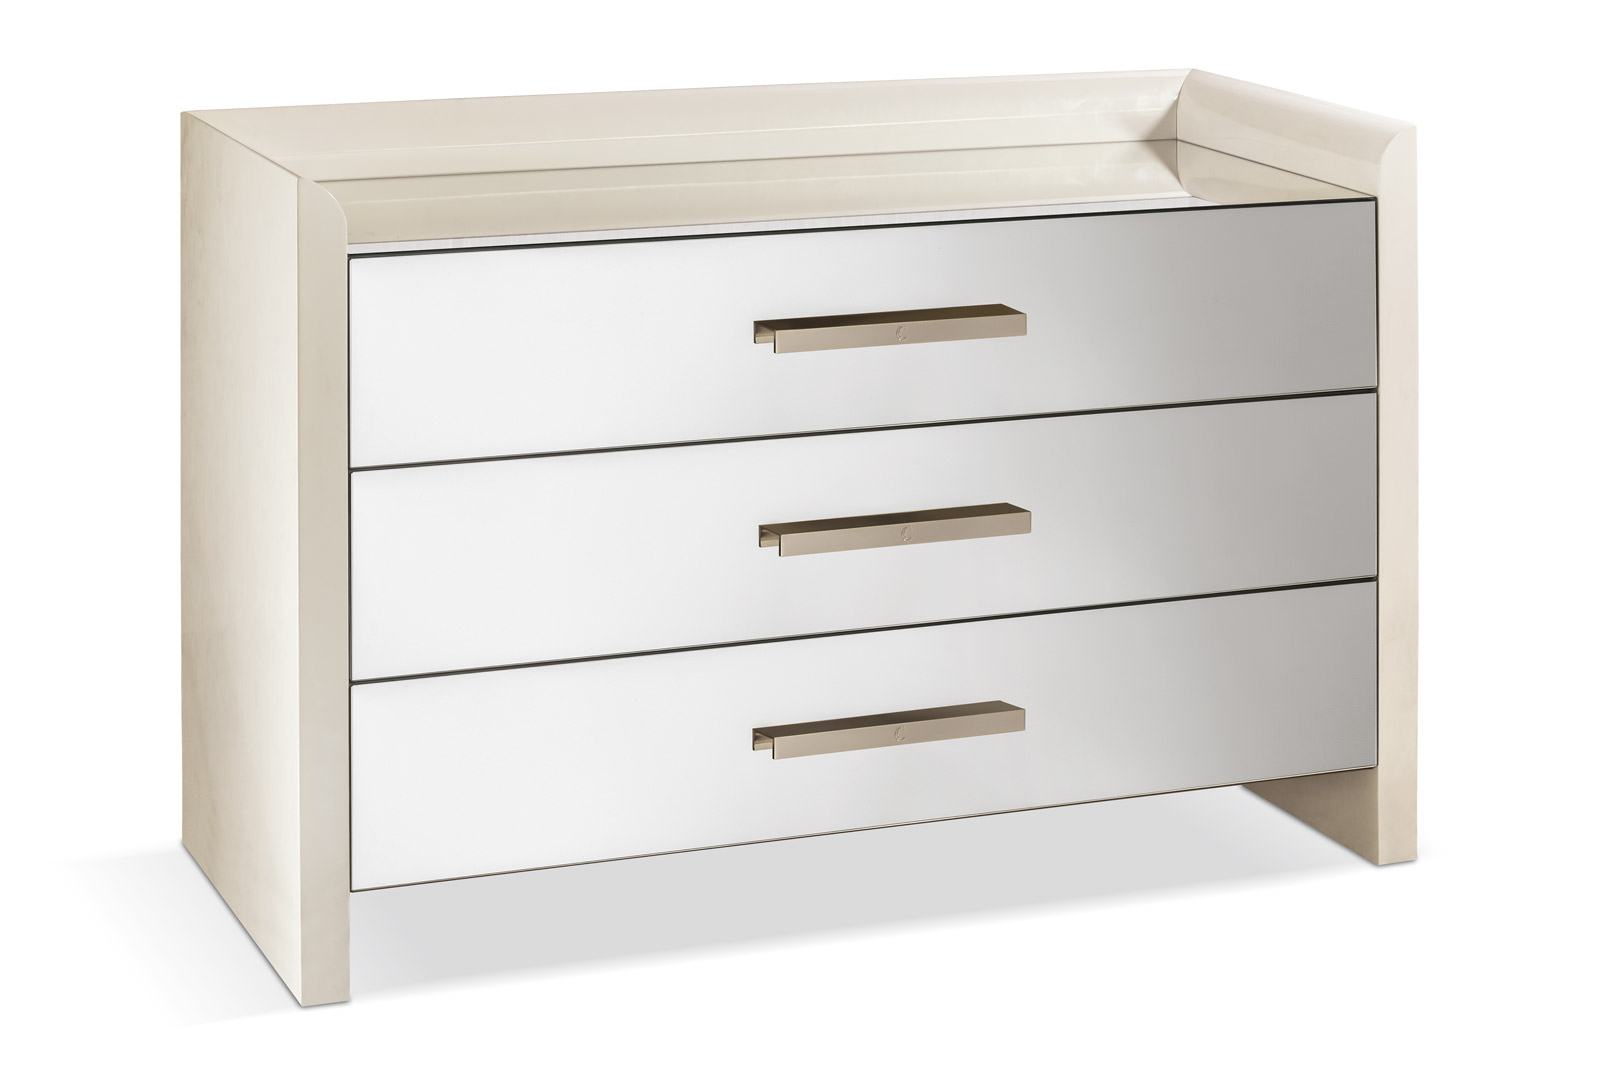 Vieste chest of drawers - Cantori